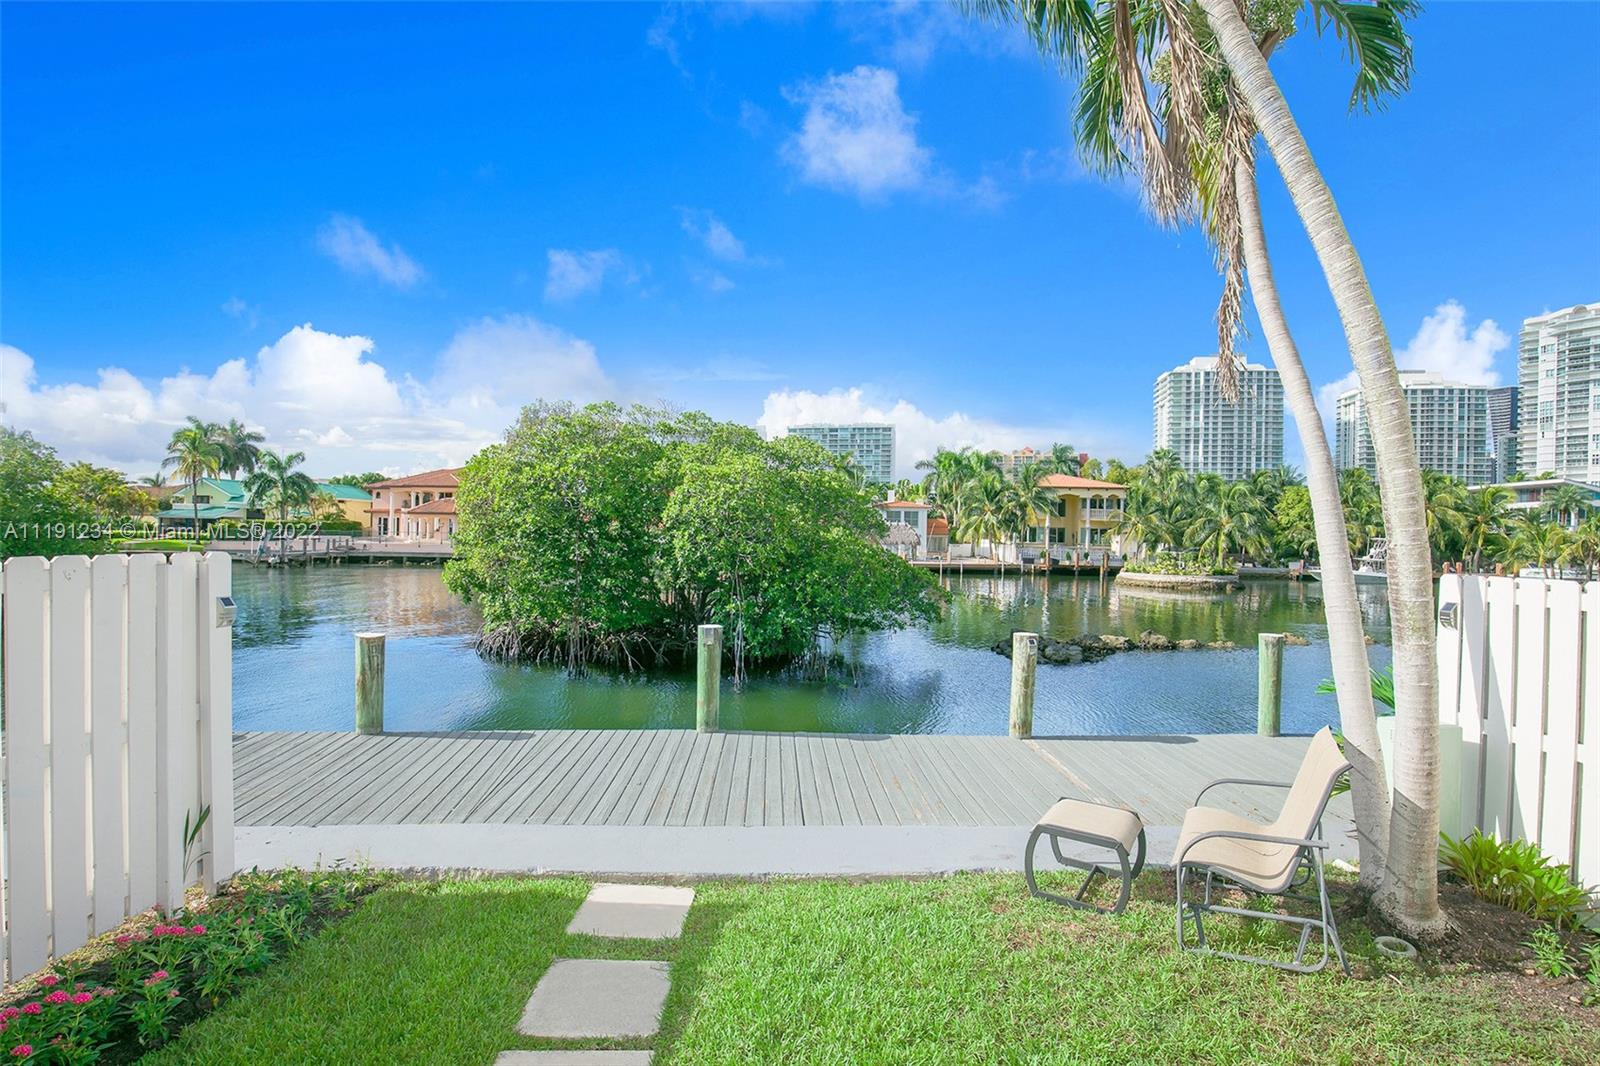 Come see this Hidden Gem in gated private island community, just few steps to the Beach. This 2,735 sqft waterfront Custom-Designed townhouse with Multi-Million Dollar views, features Entertainer's dream kitchen with Huge Bar, European white gloss cabinets, High-End Stainless Steel appliances, Designer quartz countertops/backsplash, Wall Oven & Glass Cooktop. Open concept Living/Dining/Family area features 32X32 Porcelain tile floors, Decorative dropped ceilings with LED lighting, Wood accent wall, High impact sliding doors and Glass staircase railings. Renovated bathrooms with Double Vanities, Glass enclosed shower, Large jacuzzi tub. Walk-in closets in every bedroom. Master bedroom has two custom-built closets. Newer AC & Water Heater. Dock available! True Boater's paradise!